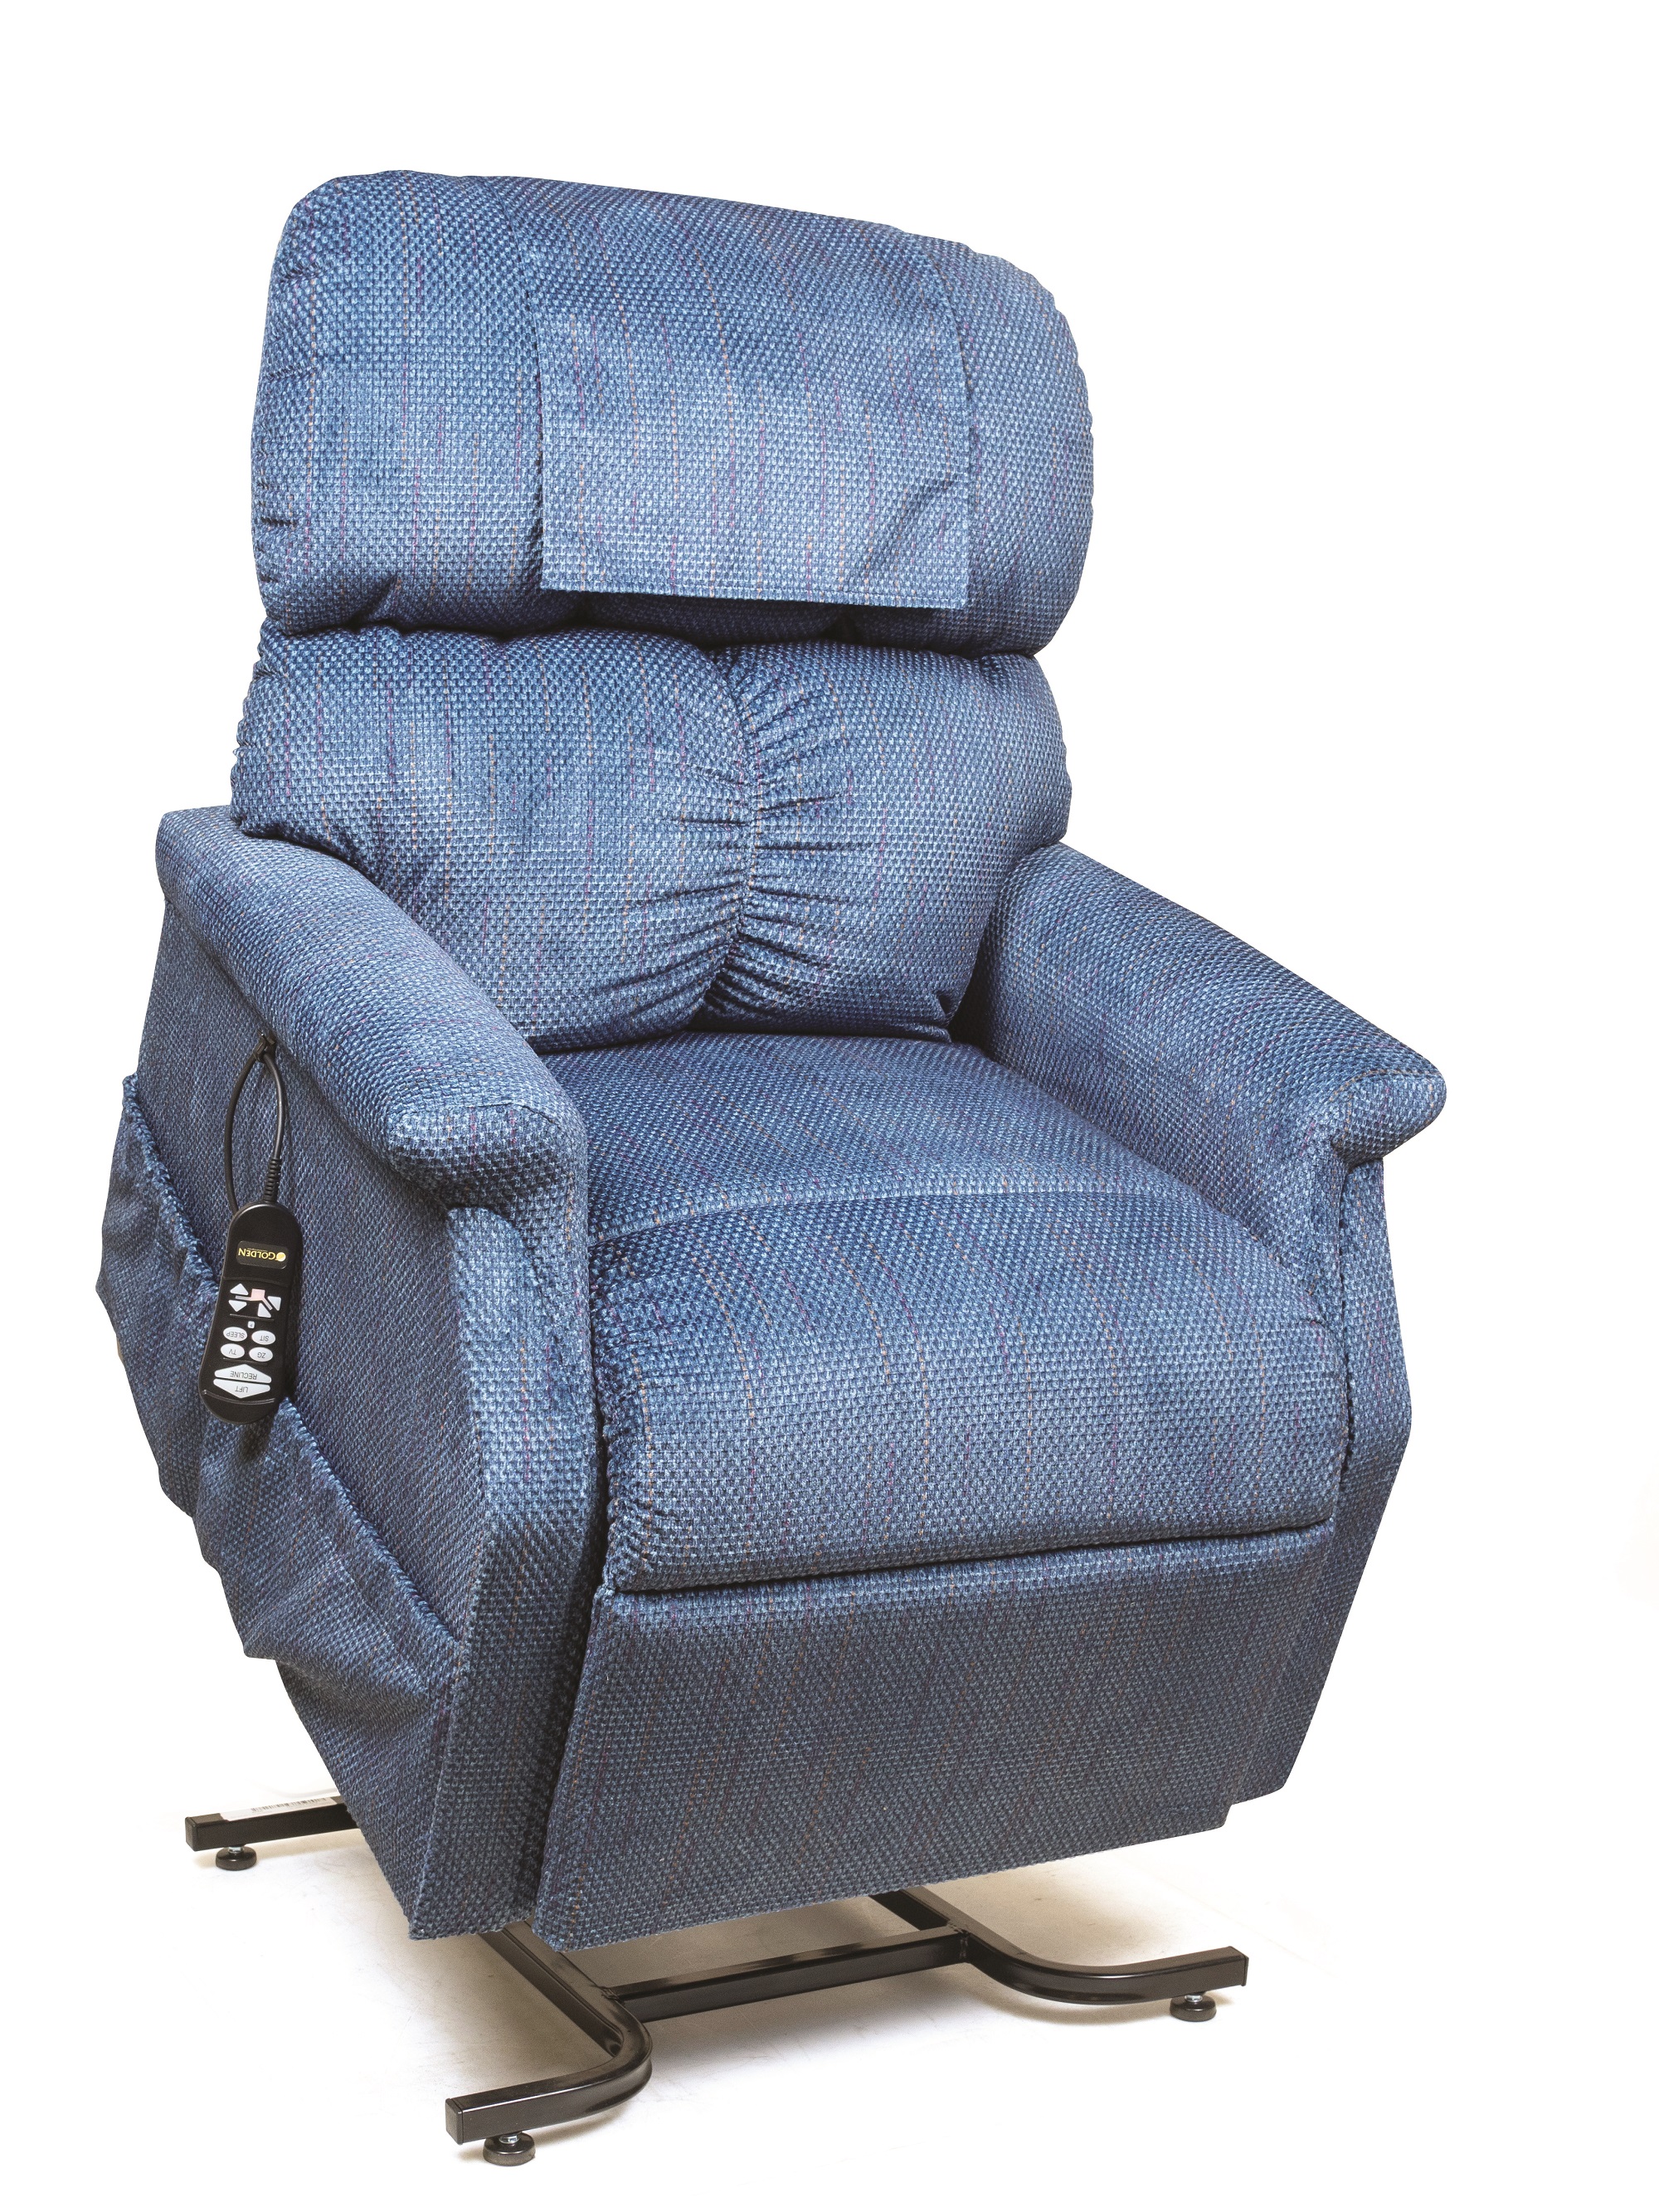 Photo of Infinite Comforter Lift Chair by Golden Technologies - Small